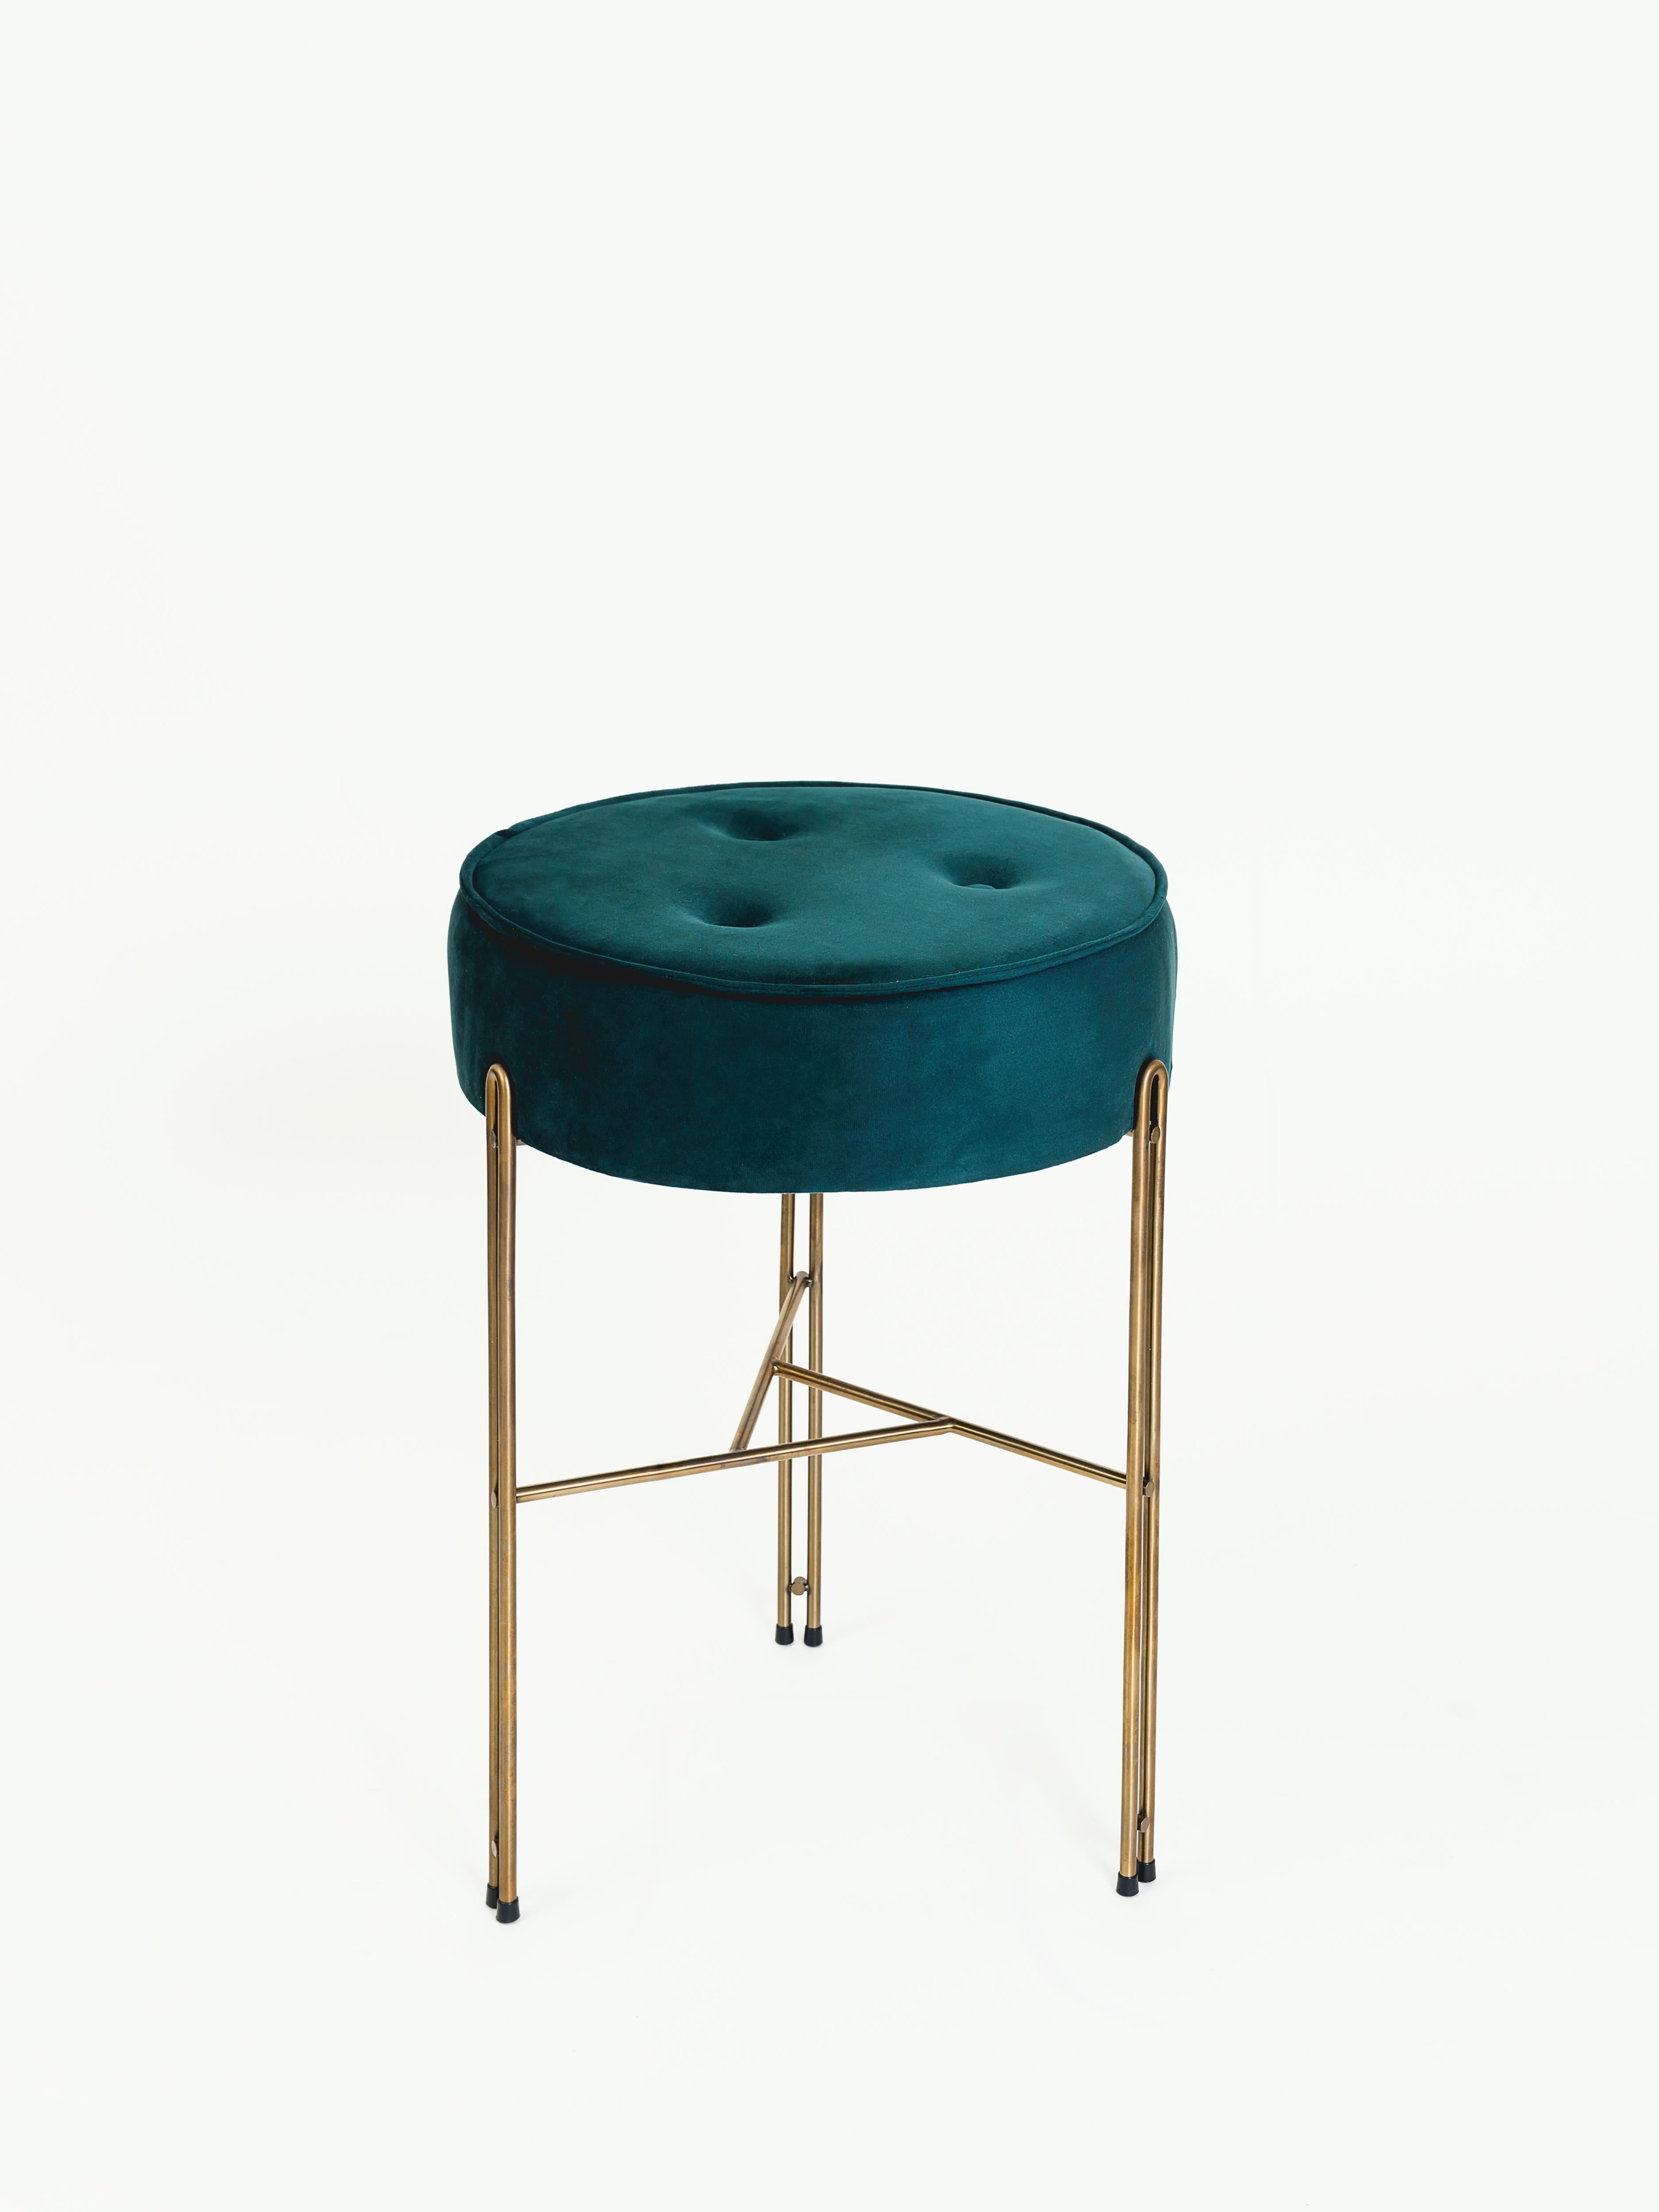 The Linha collection was designed from the top to bottom. The first piece of this collection is the planter pedestal. One of the other pieces in this collection is this upholstered stool.

